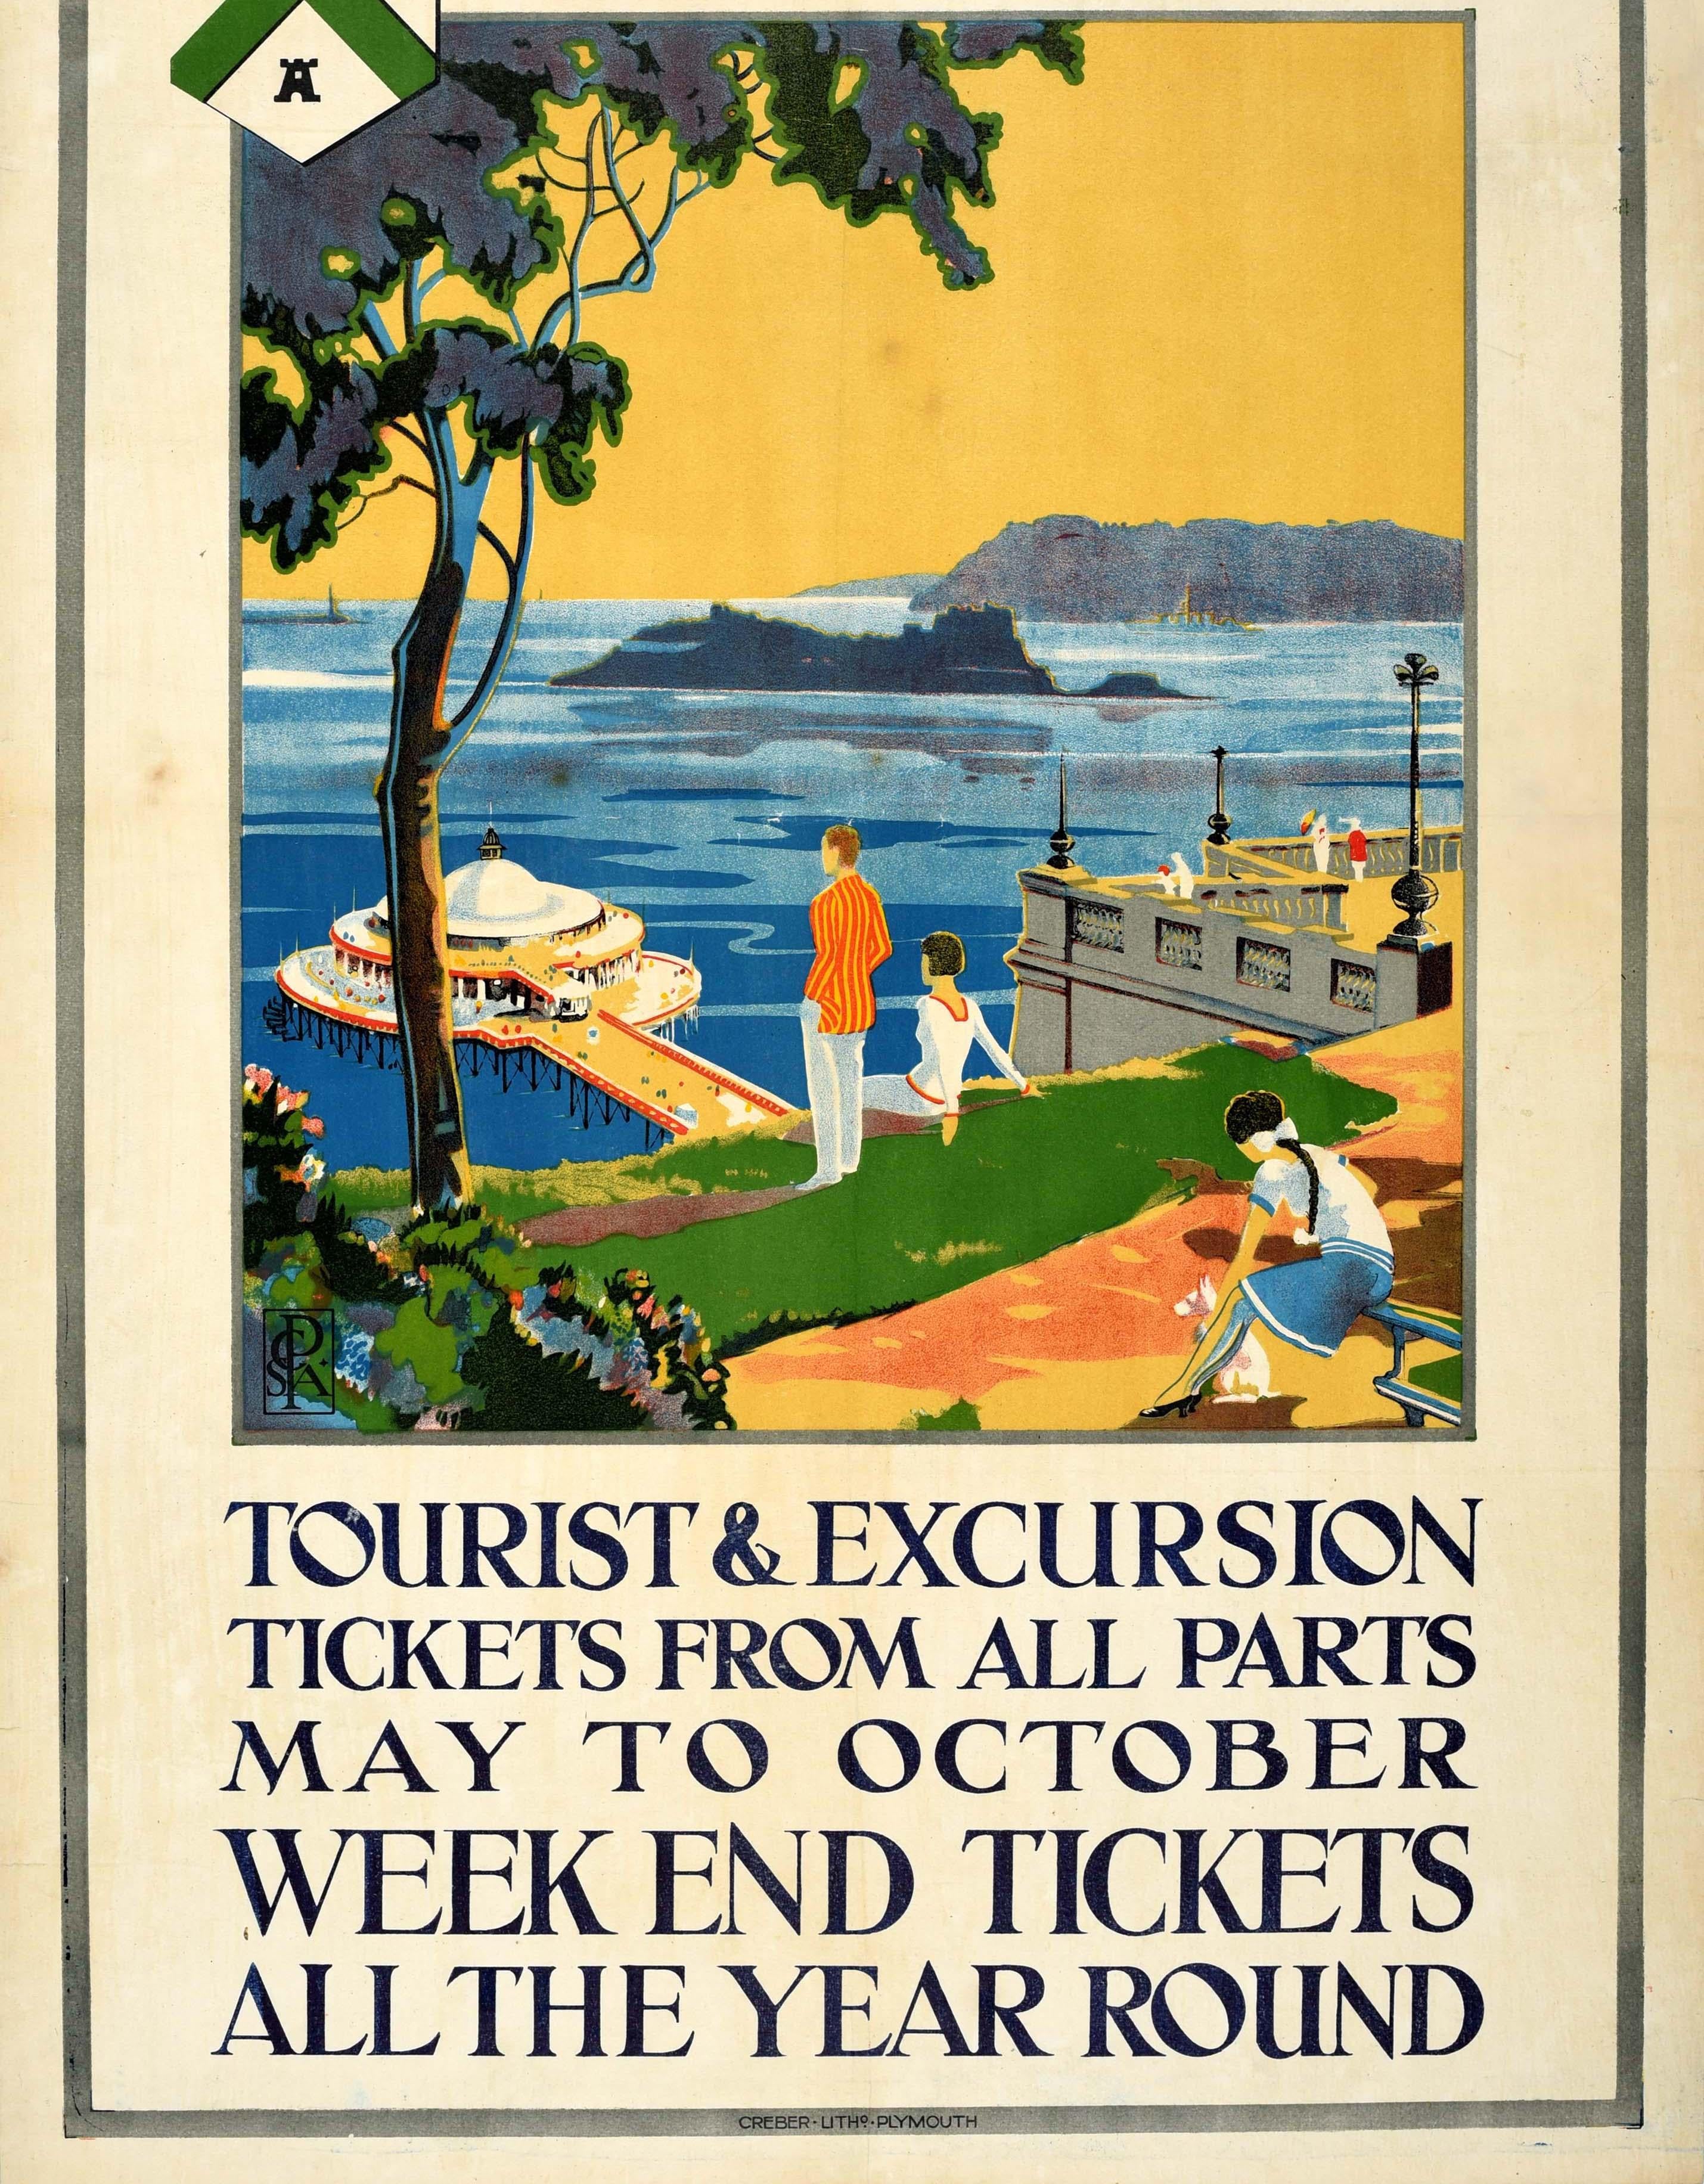 Original antique train travel advertising poster - Great Western Railway Plymouth The centre of 100 tours in sunny South Devon - featuring a colourful Art Deco style illustration of people admiring the view on a hill in the foreground looking down